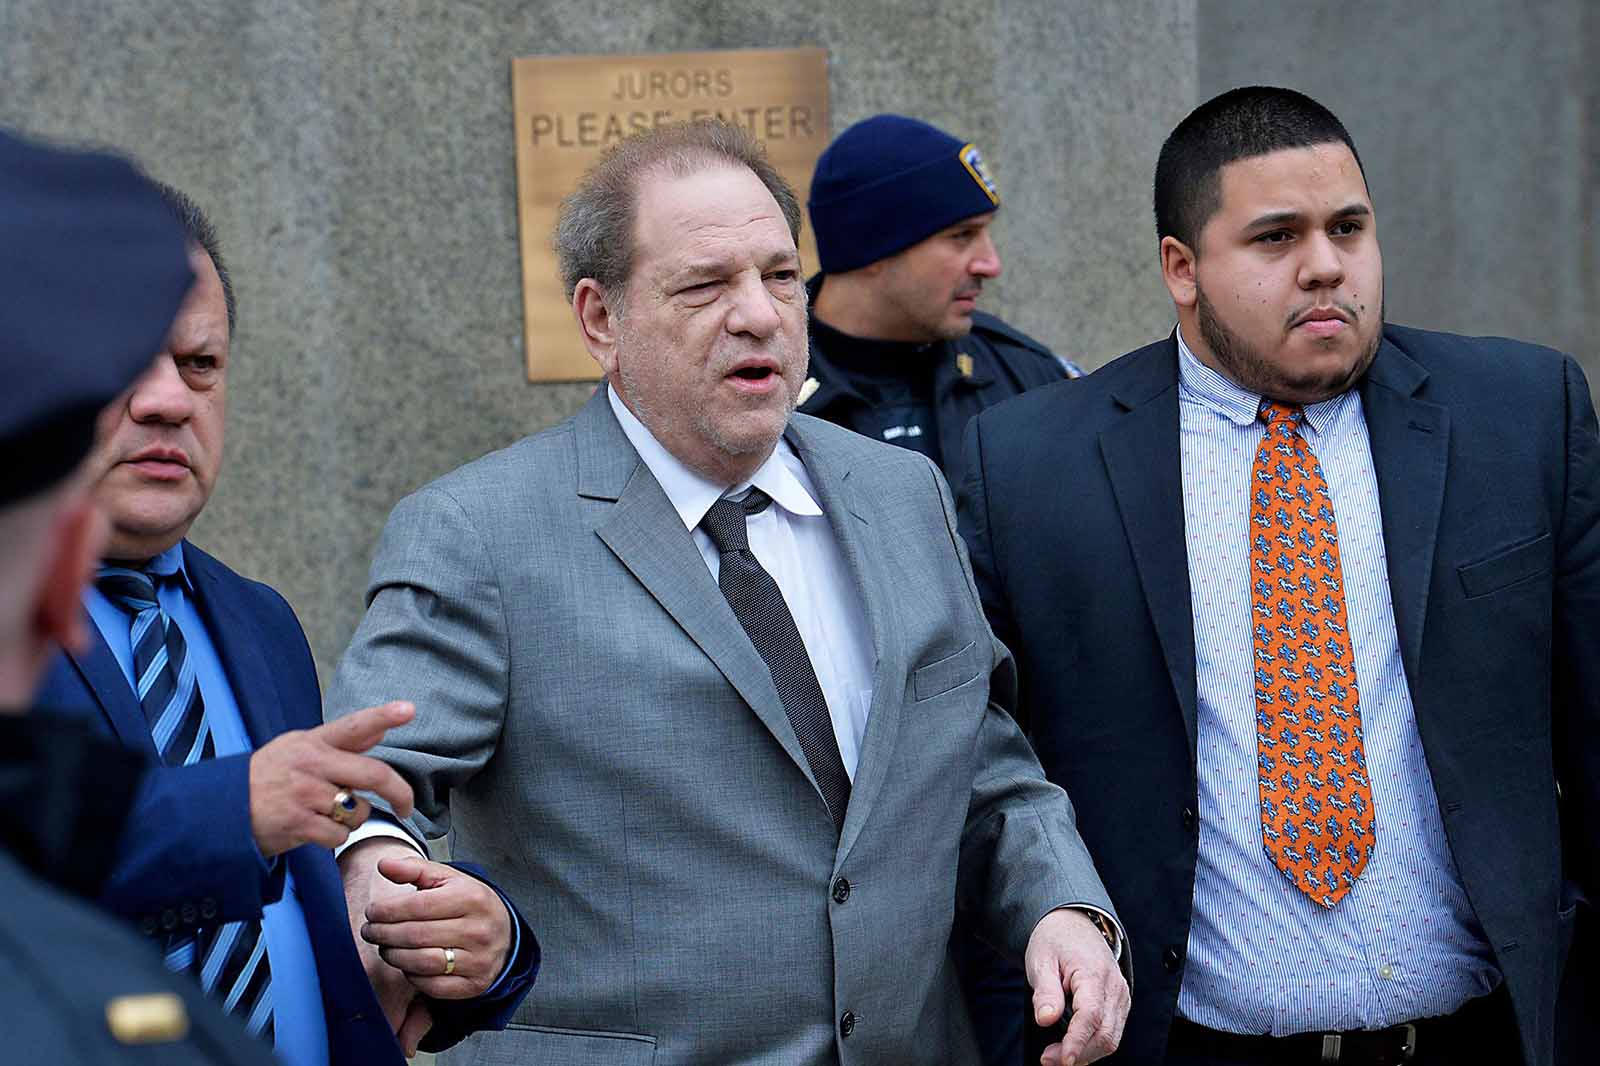 Harvey Weinstein's legal woes aren't completely over. New charges have been filed in the LA District Attorney's case against Weinstein.